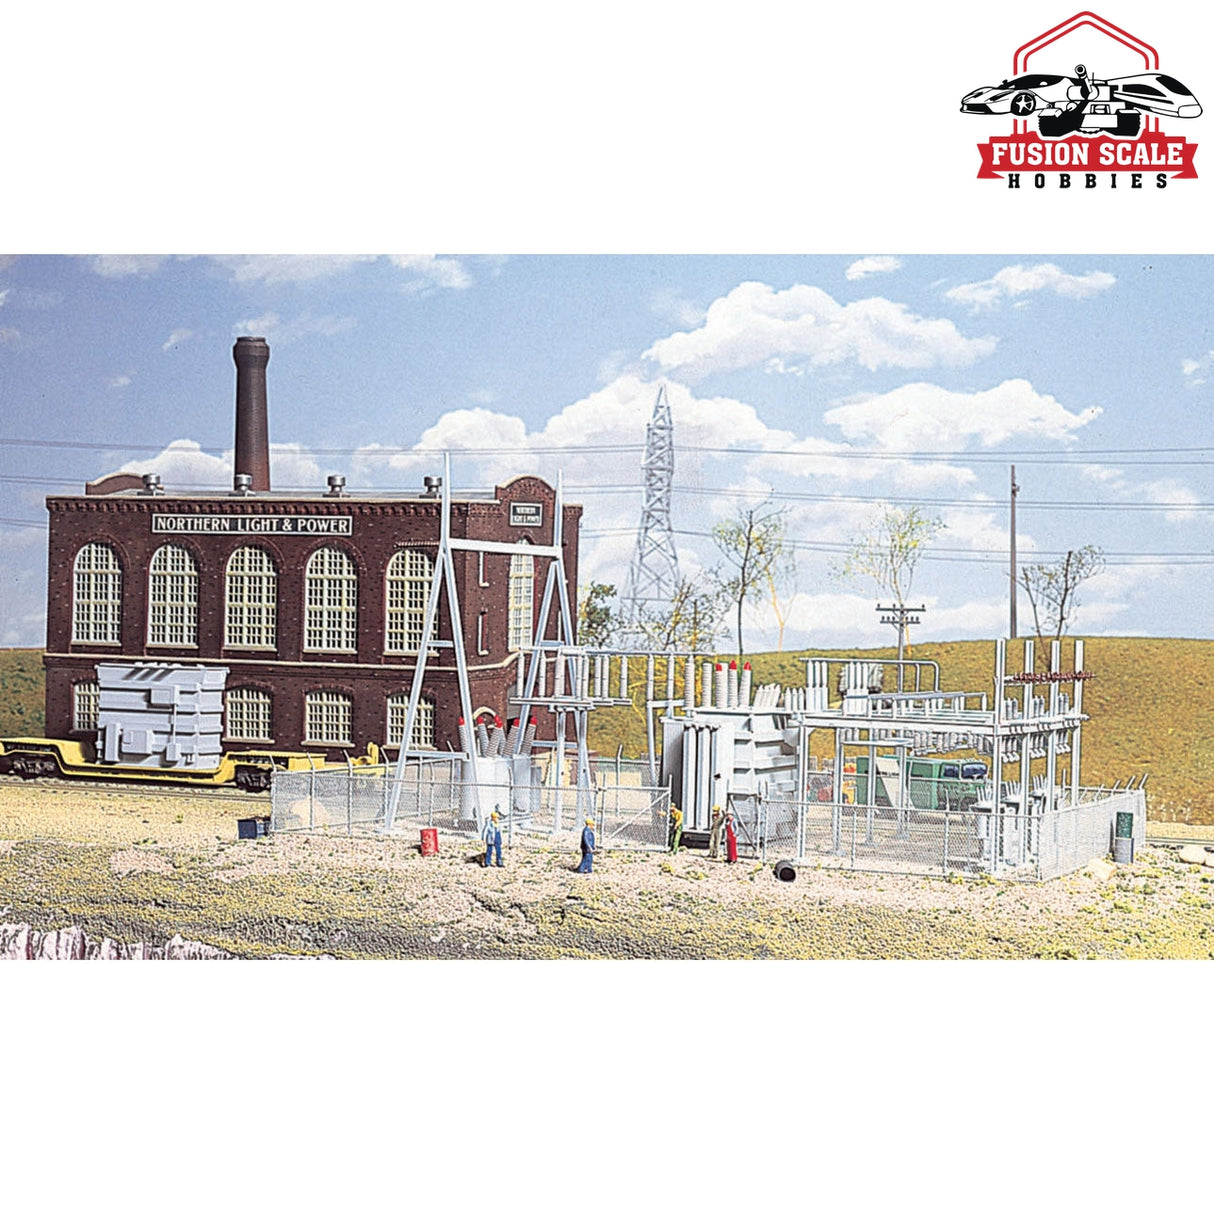 Walthers Cornerstone HO Scale Northern Light & Power Substation Kit 81/2 x 121/2" 21.6 x 31.8cm